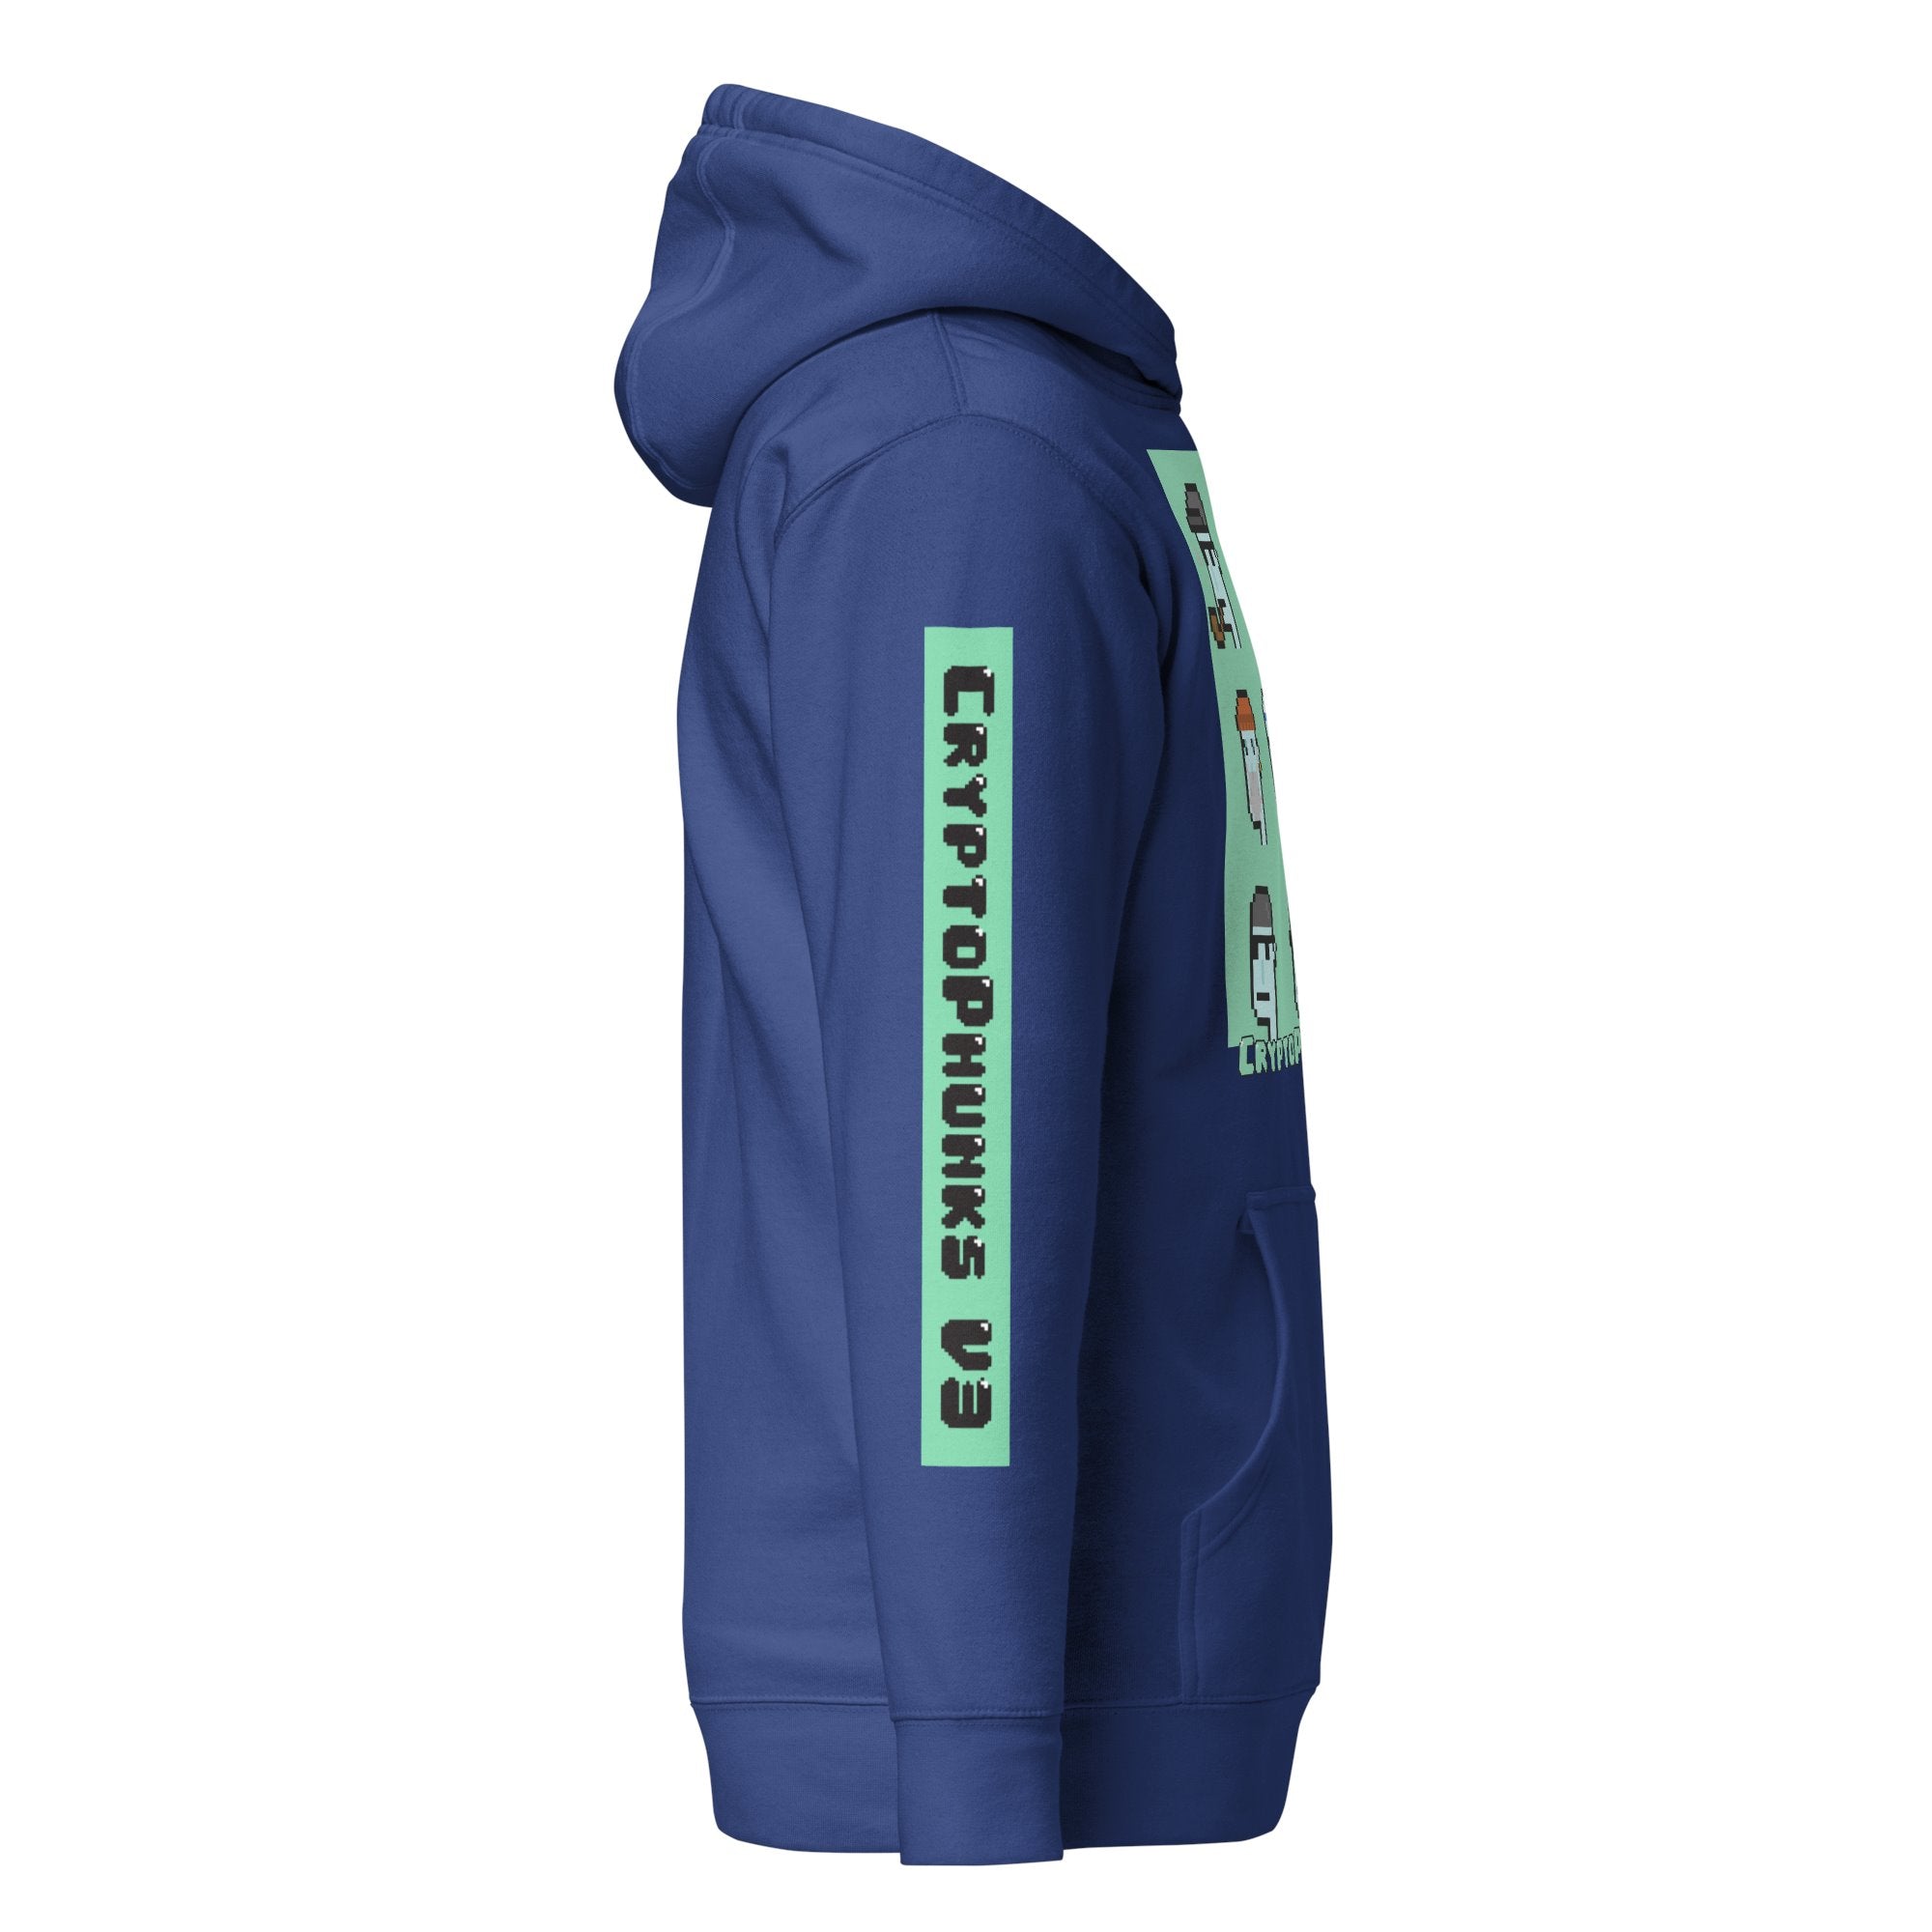 CryptoPhunks V3 Hoodie - Alien Squad on The Good Shop Online Store